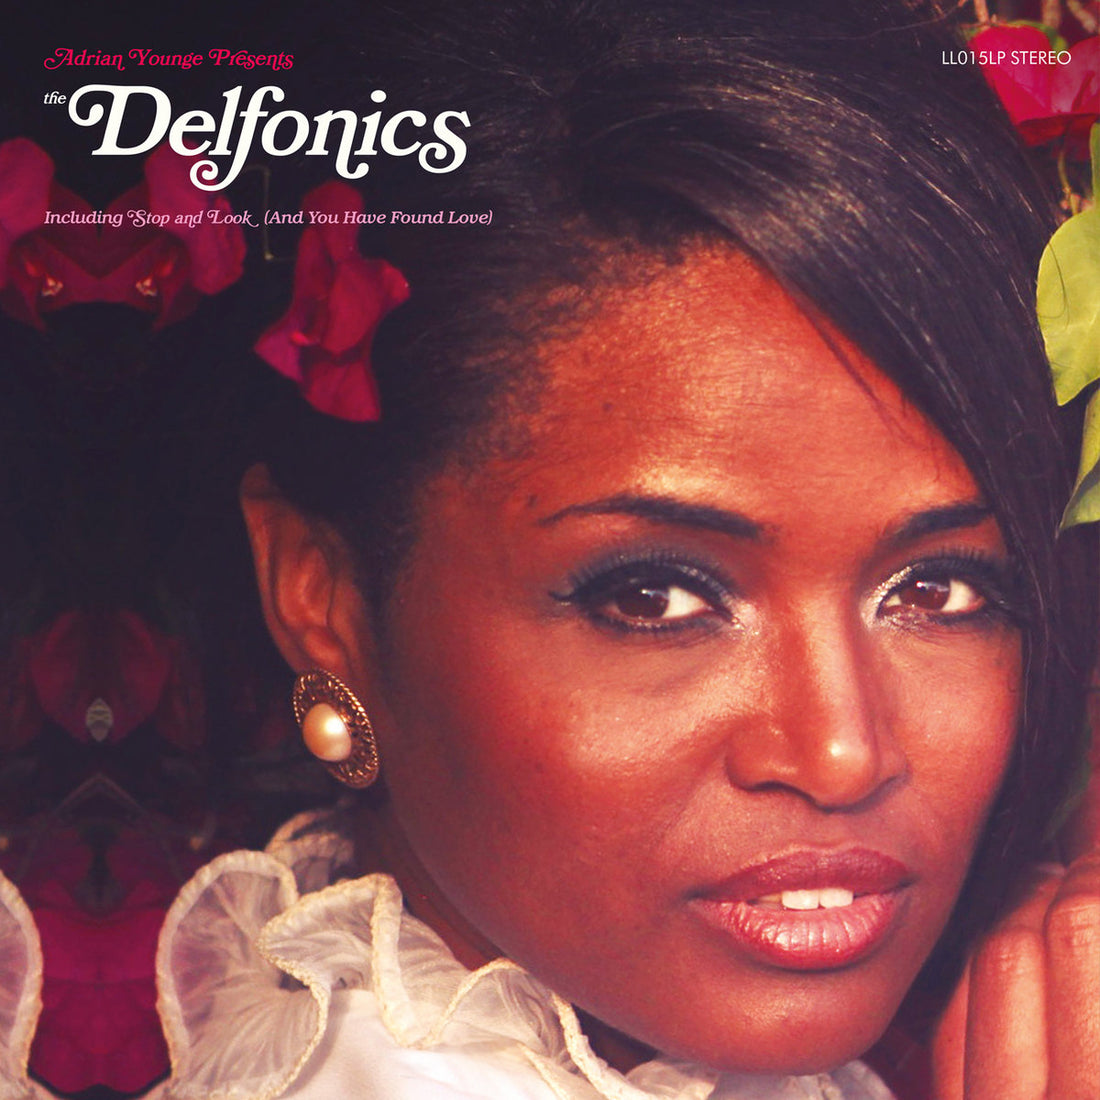 Adrian Younge- Presents the Delfonics